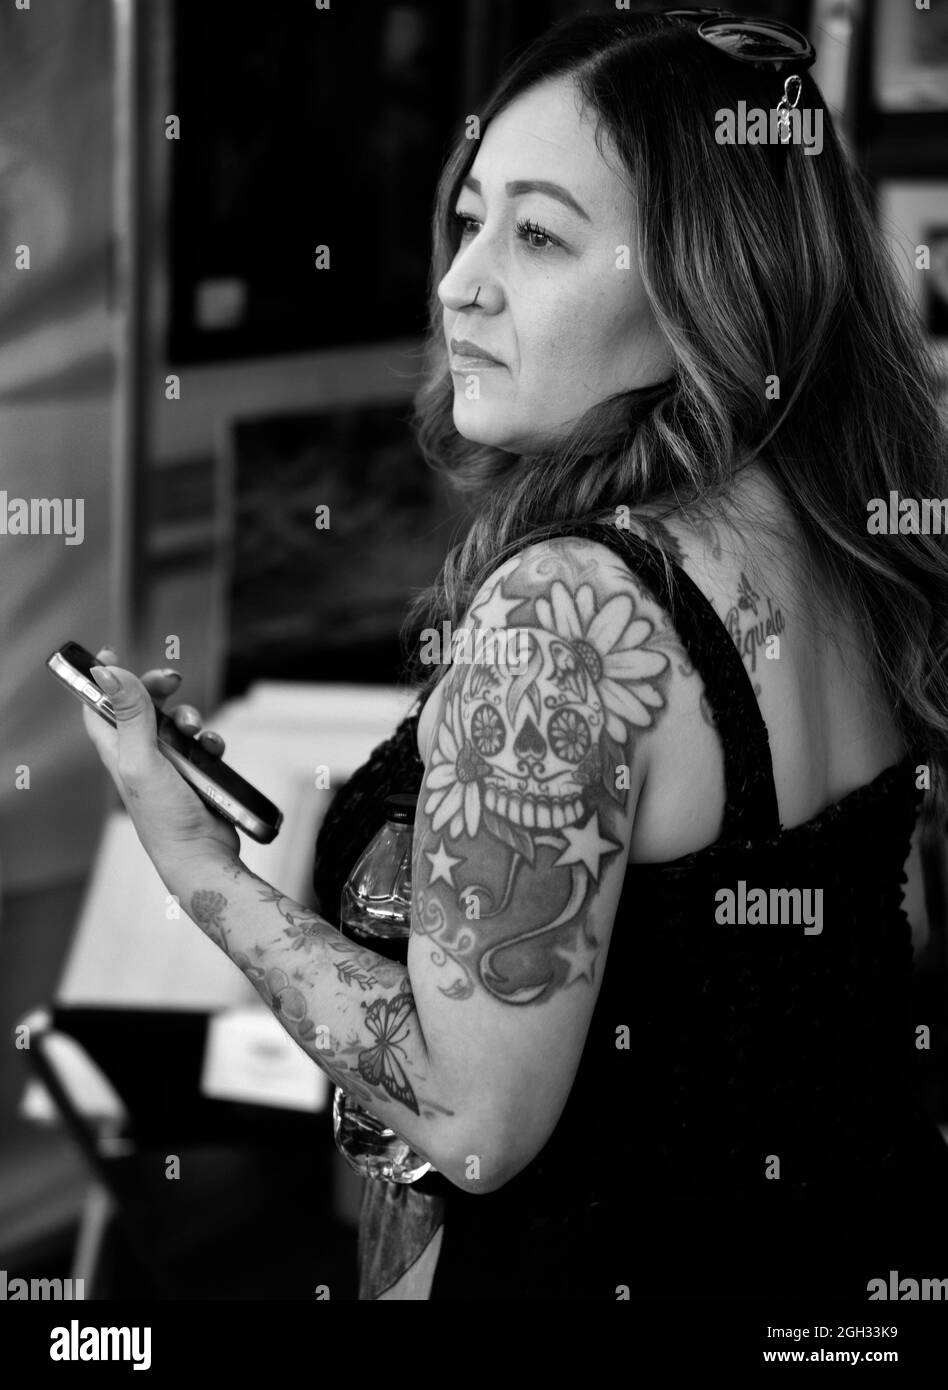 A woman with tattoos on her arm uses her smartphone while visiting Santa Fe, New Mexico. Stock Photo